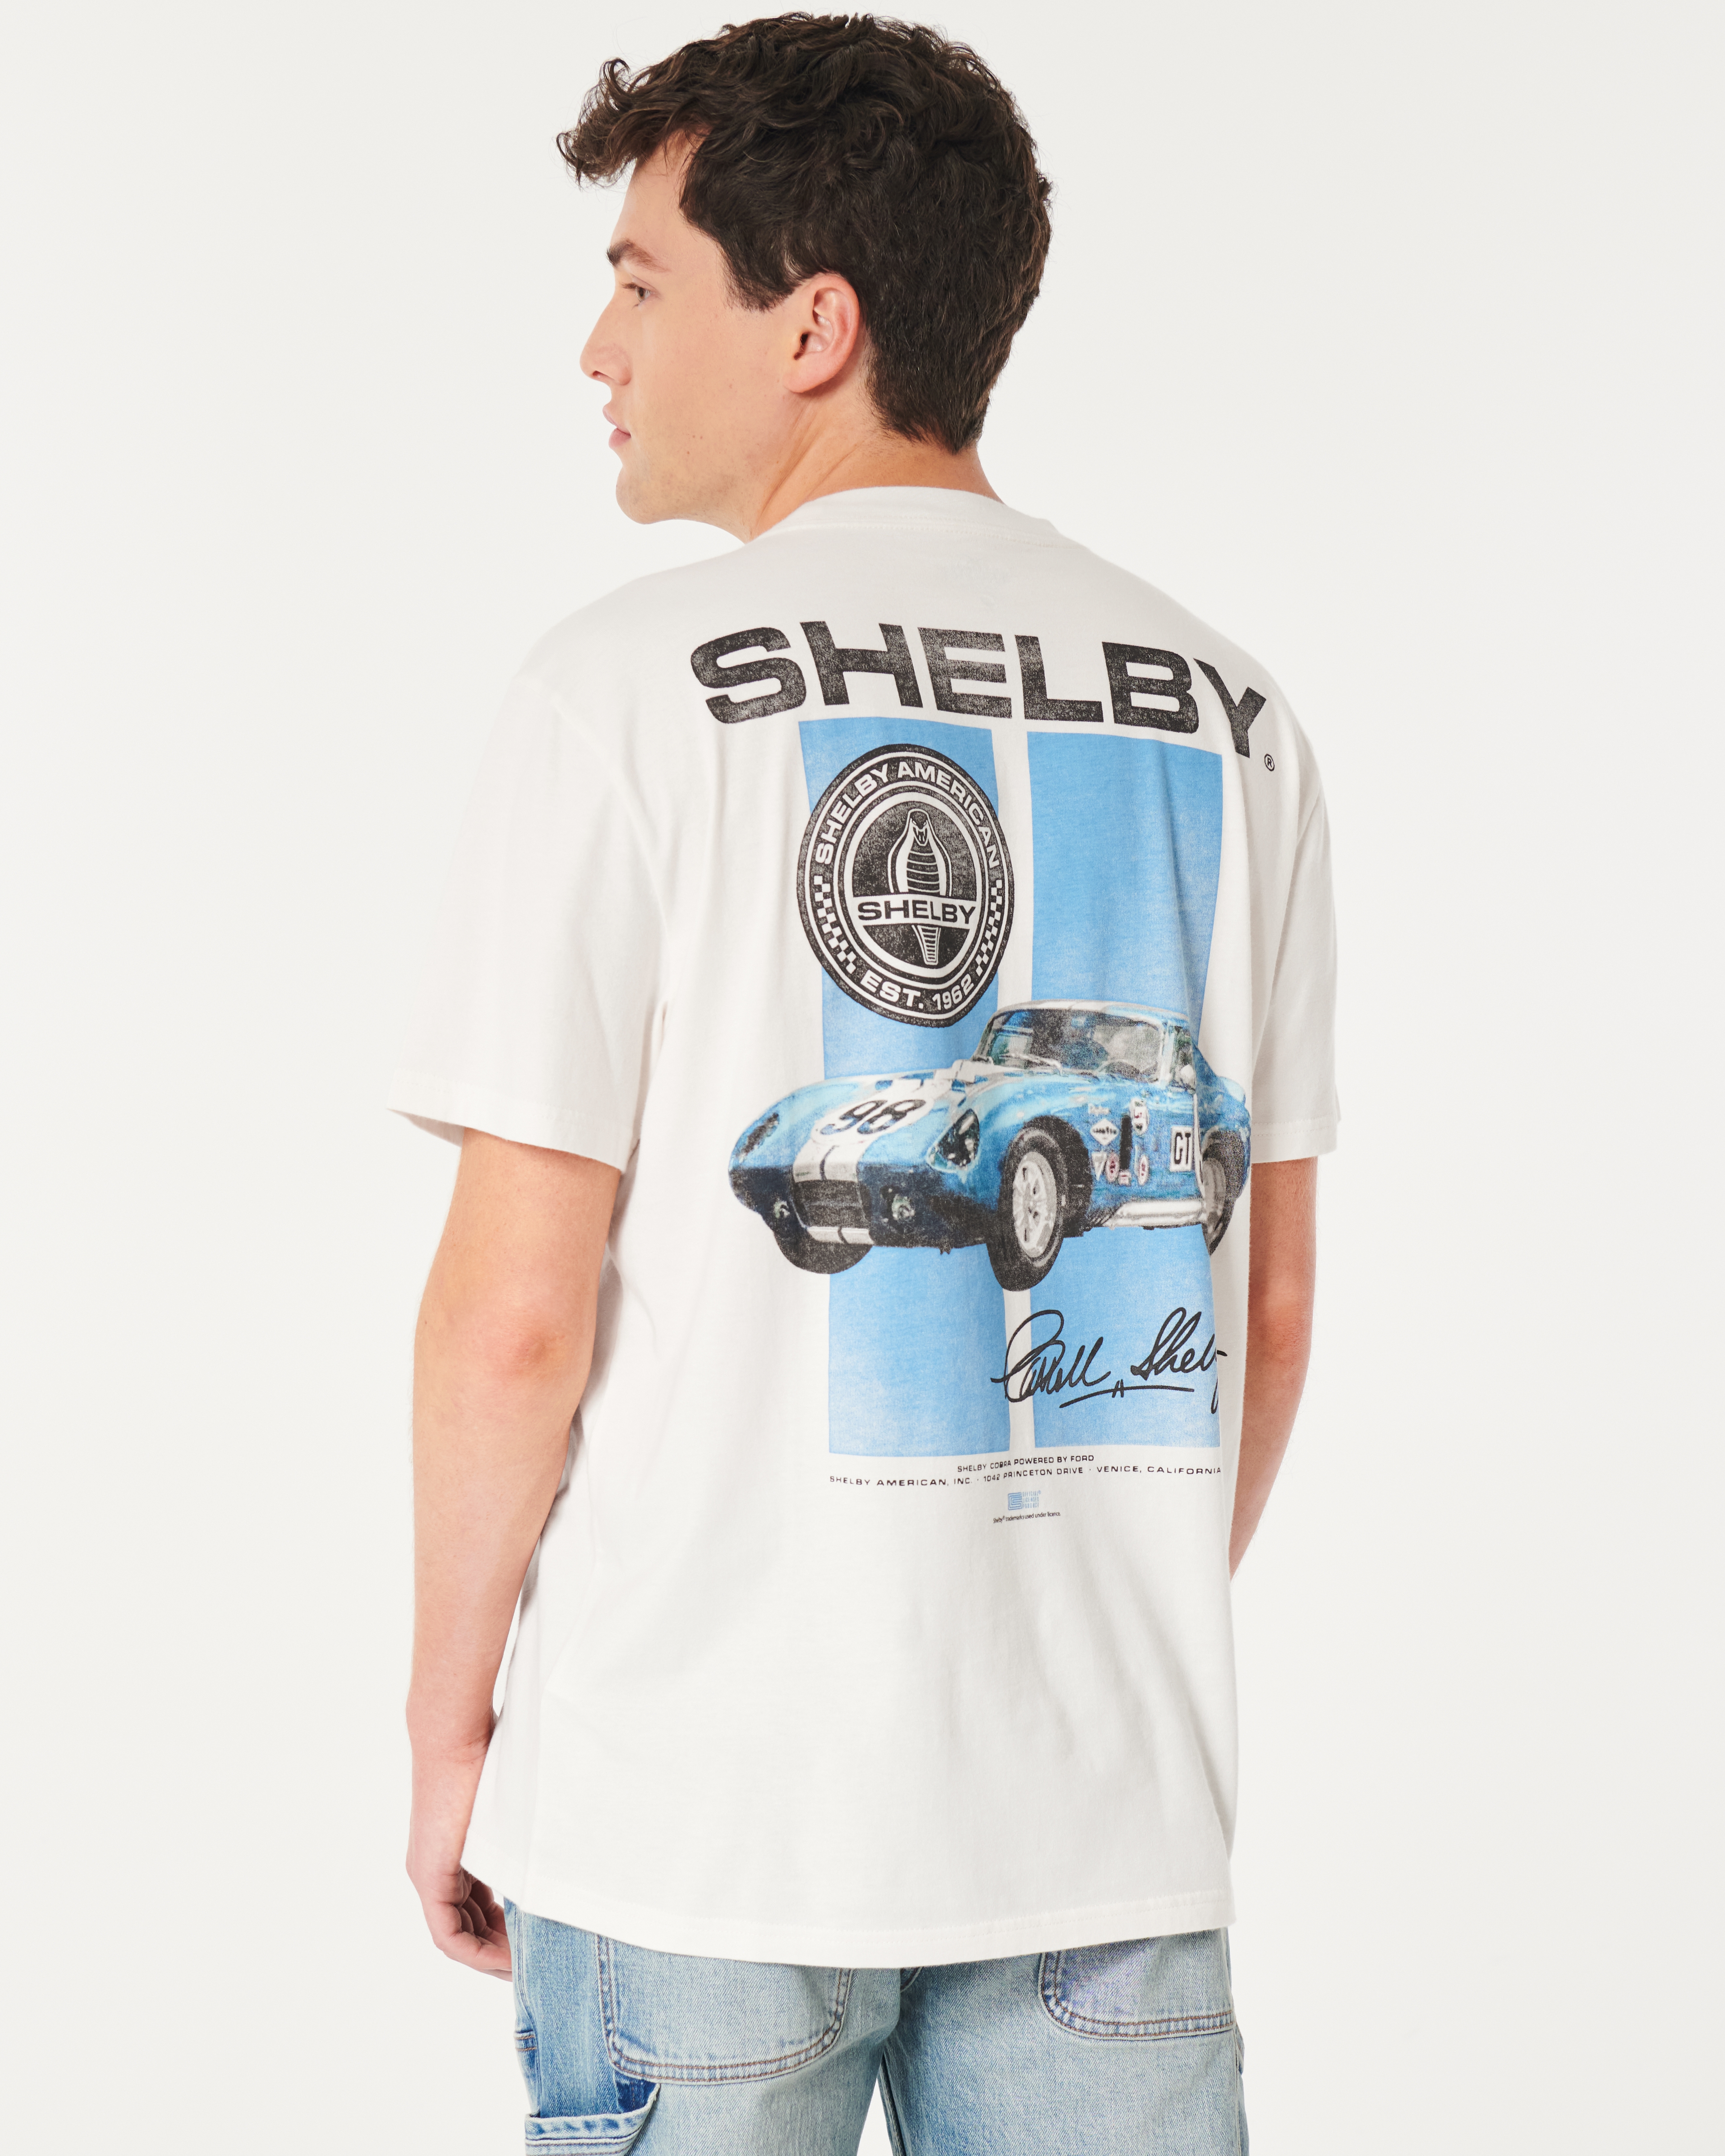 Men's Relaxed Shelby Car Graphic Tee | Men's Tops | HollisterCo.ca